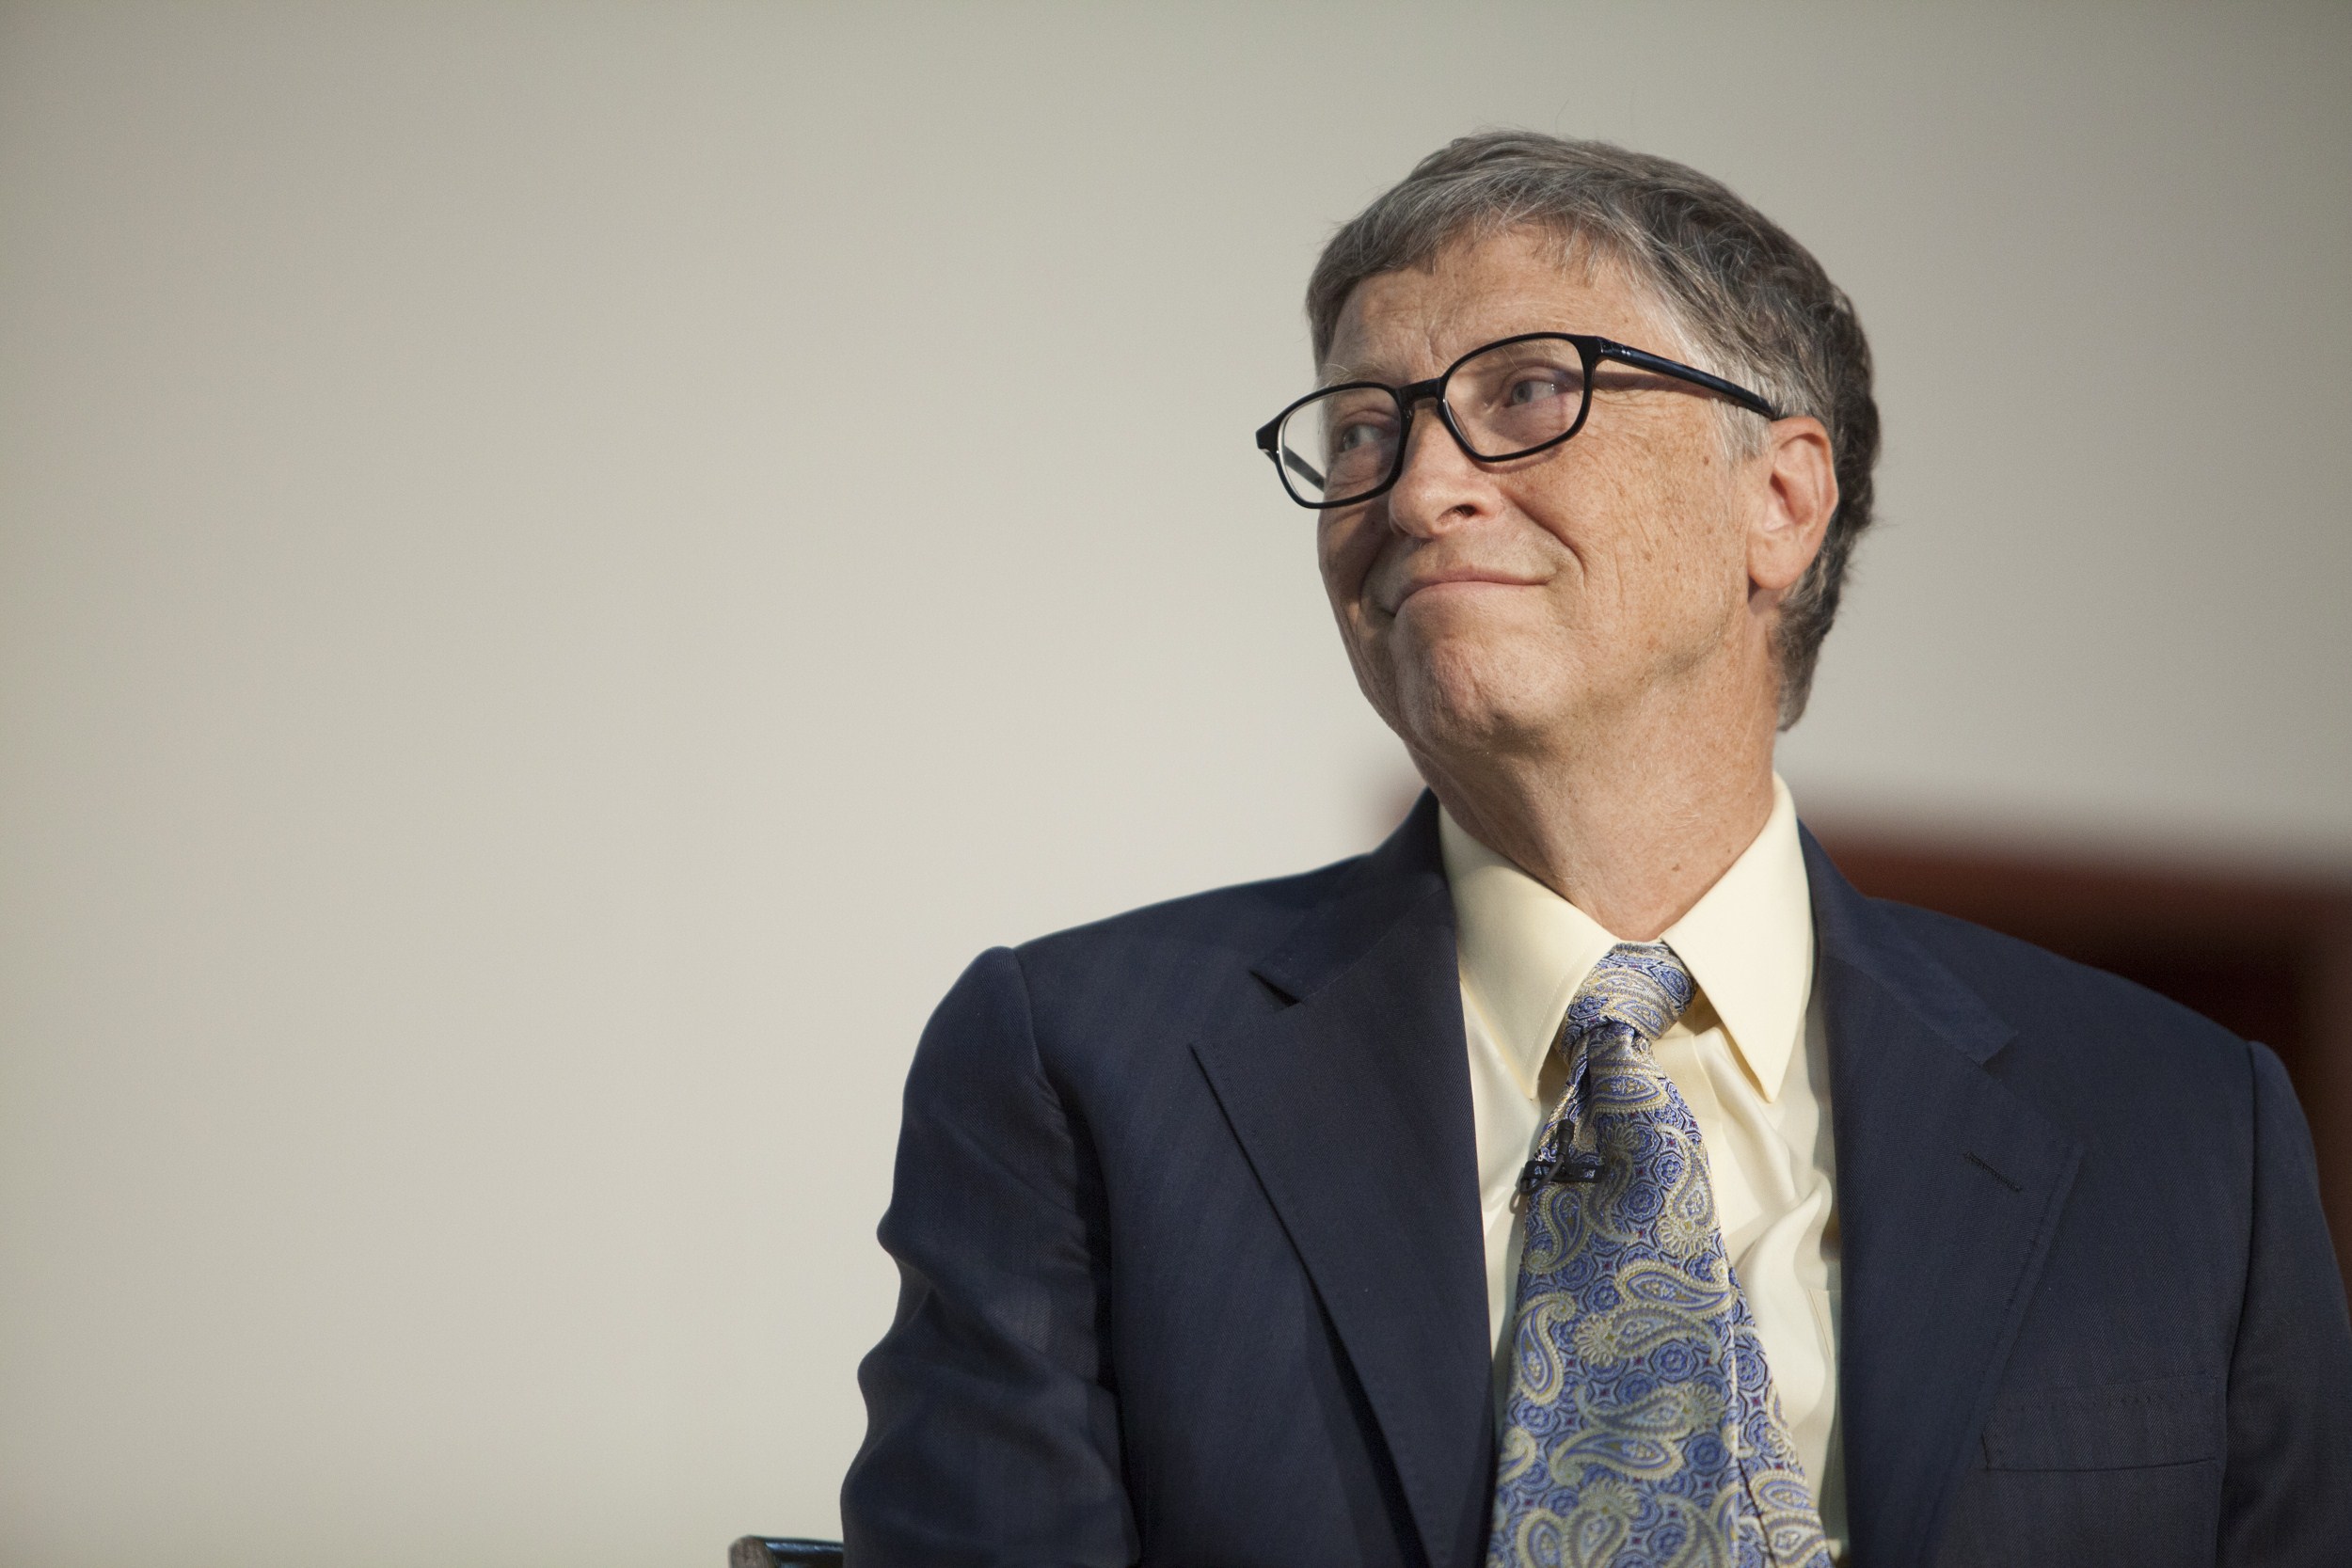 Bill Gates delivers a speech after receiving an honorary degree at Addis Ababa University in Addis Ababa, Ethiopia, on July 24, 2014. (ZACHARIAS ABUBEKER —AFP/Getty Images)